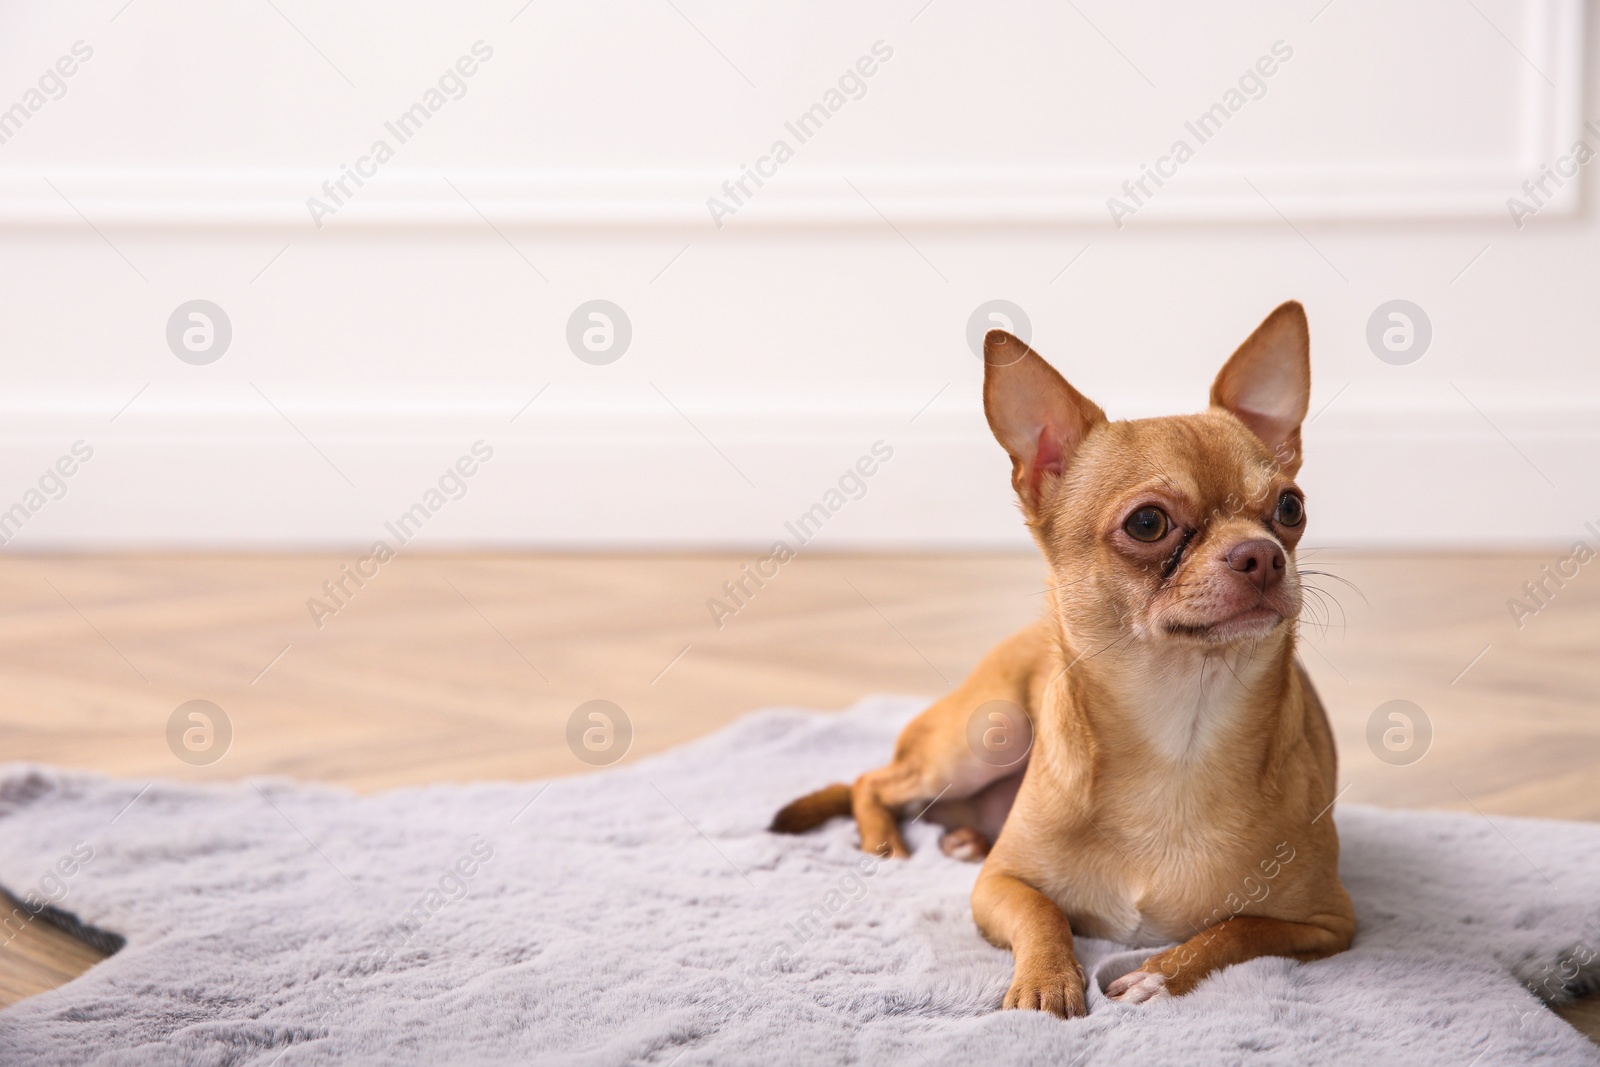 Photo of Cute Chihuahua dog lying on warm floor indoors, space for text. Heating system